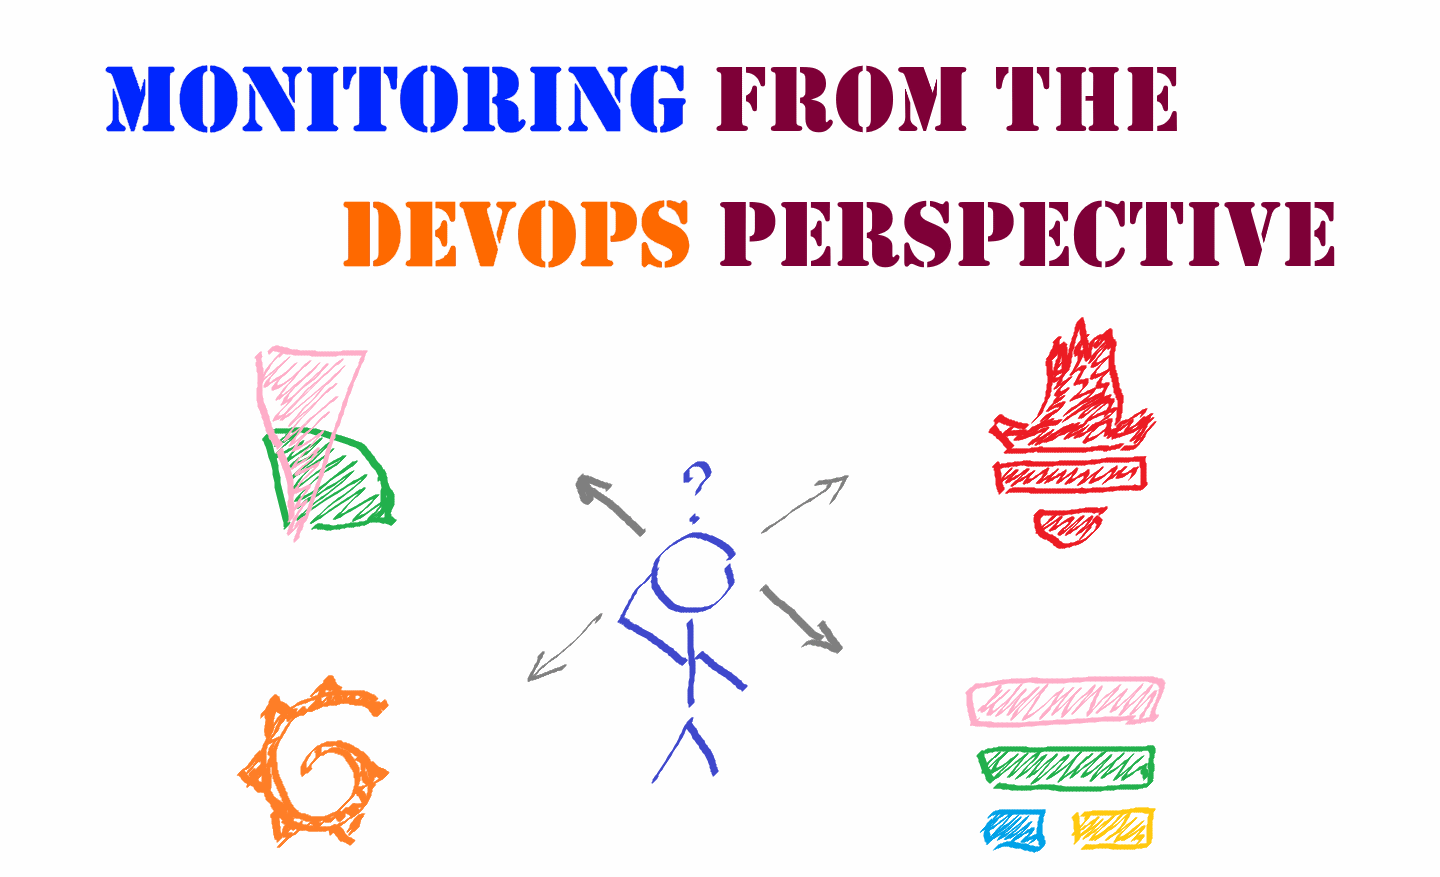 Monitoring from the DevOps perspective